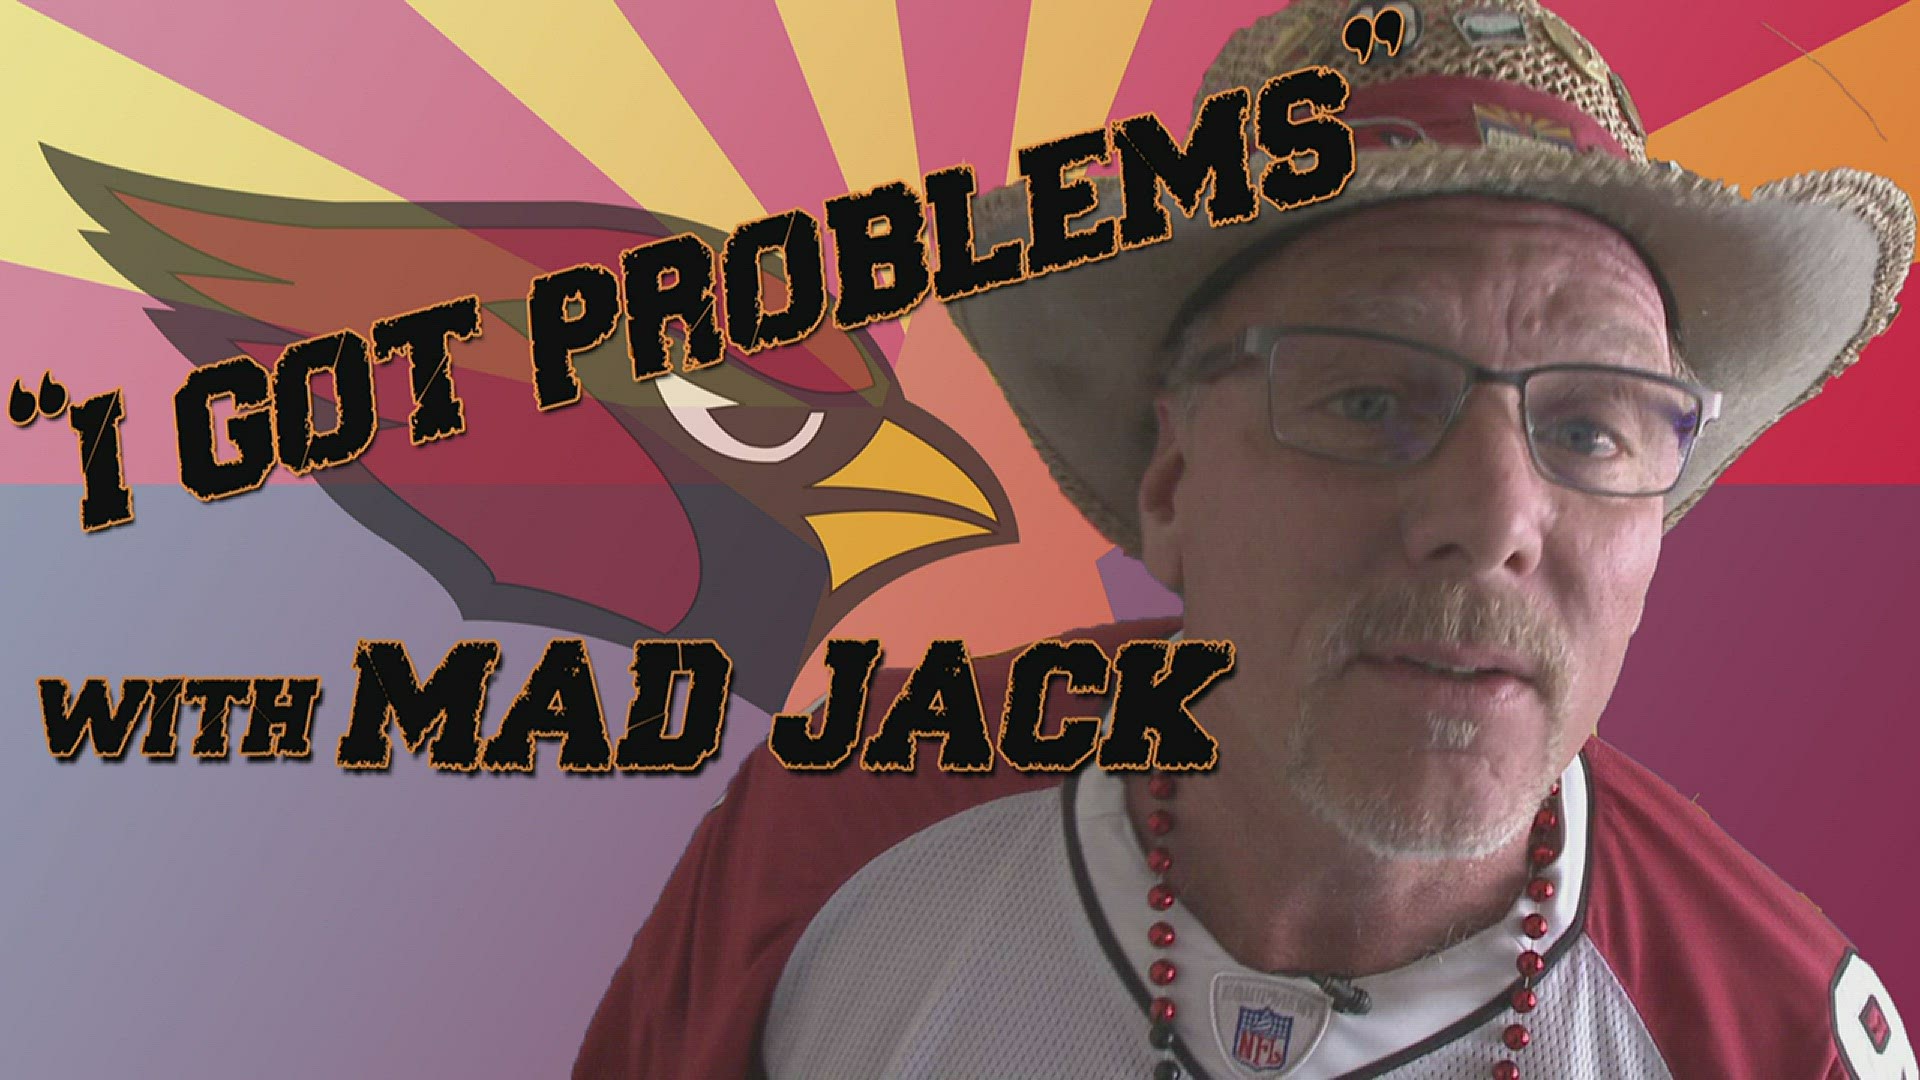 Mad Jack has some problems with San Francisco.